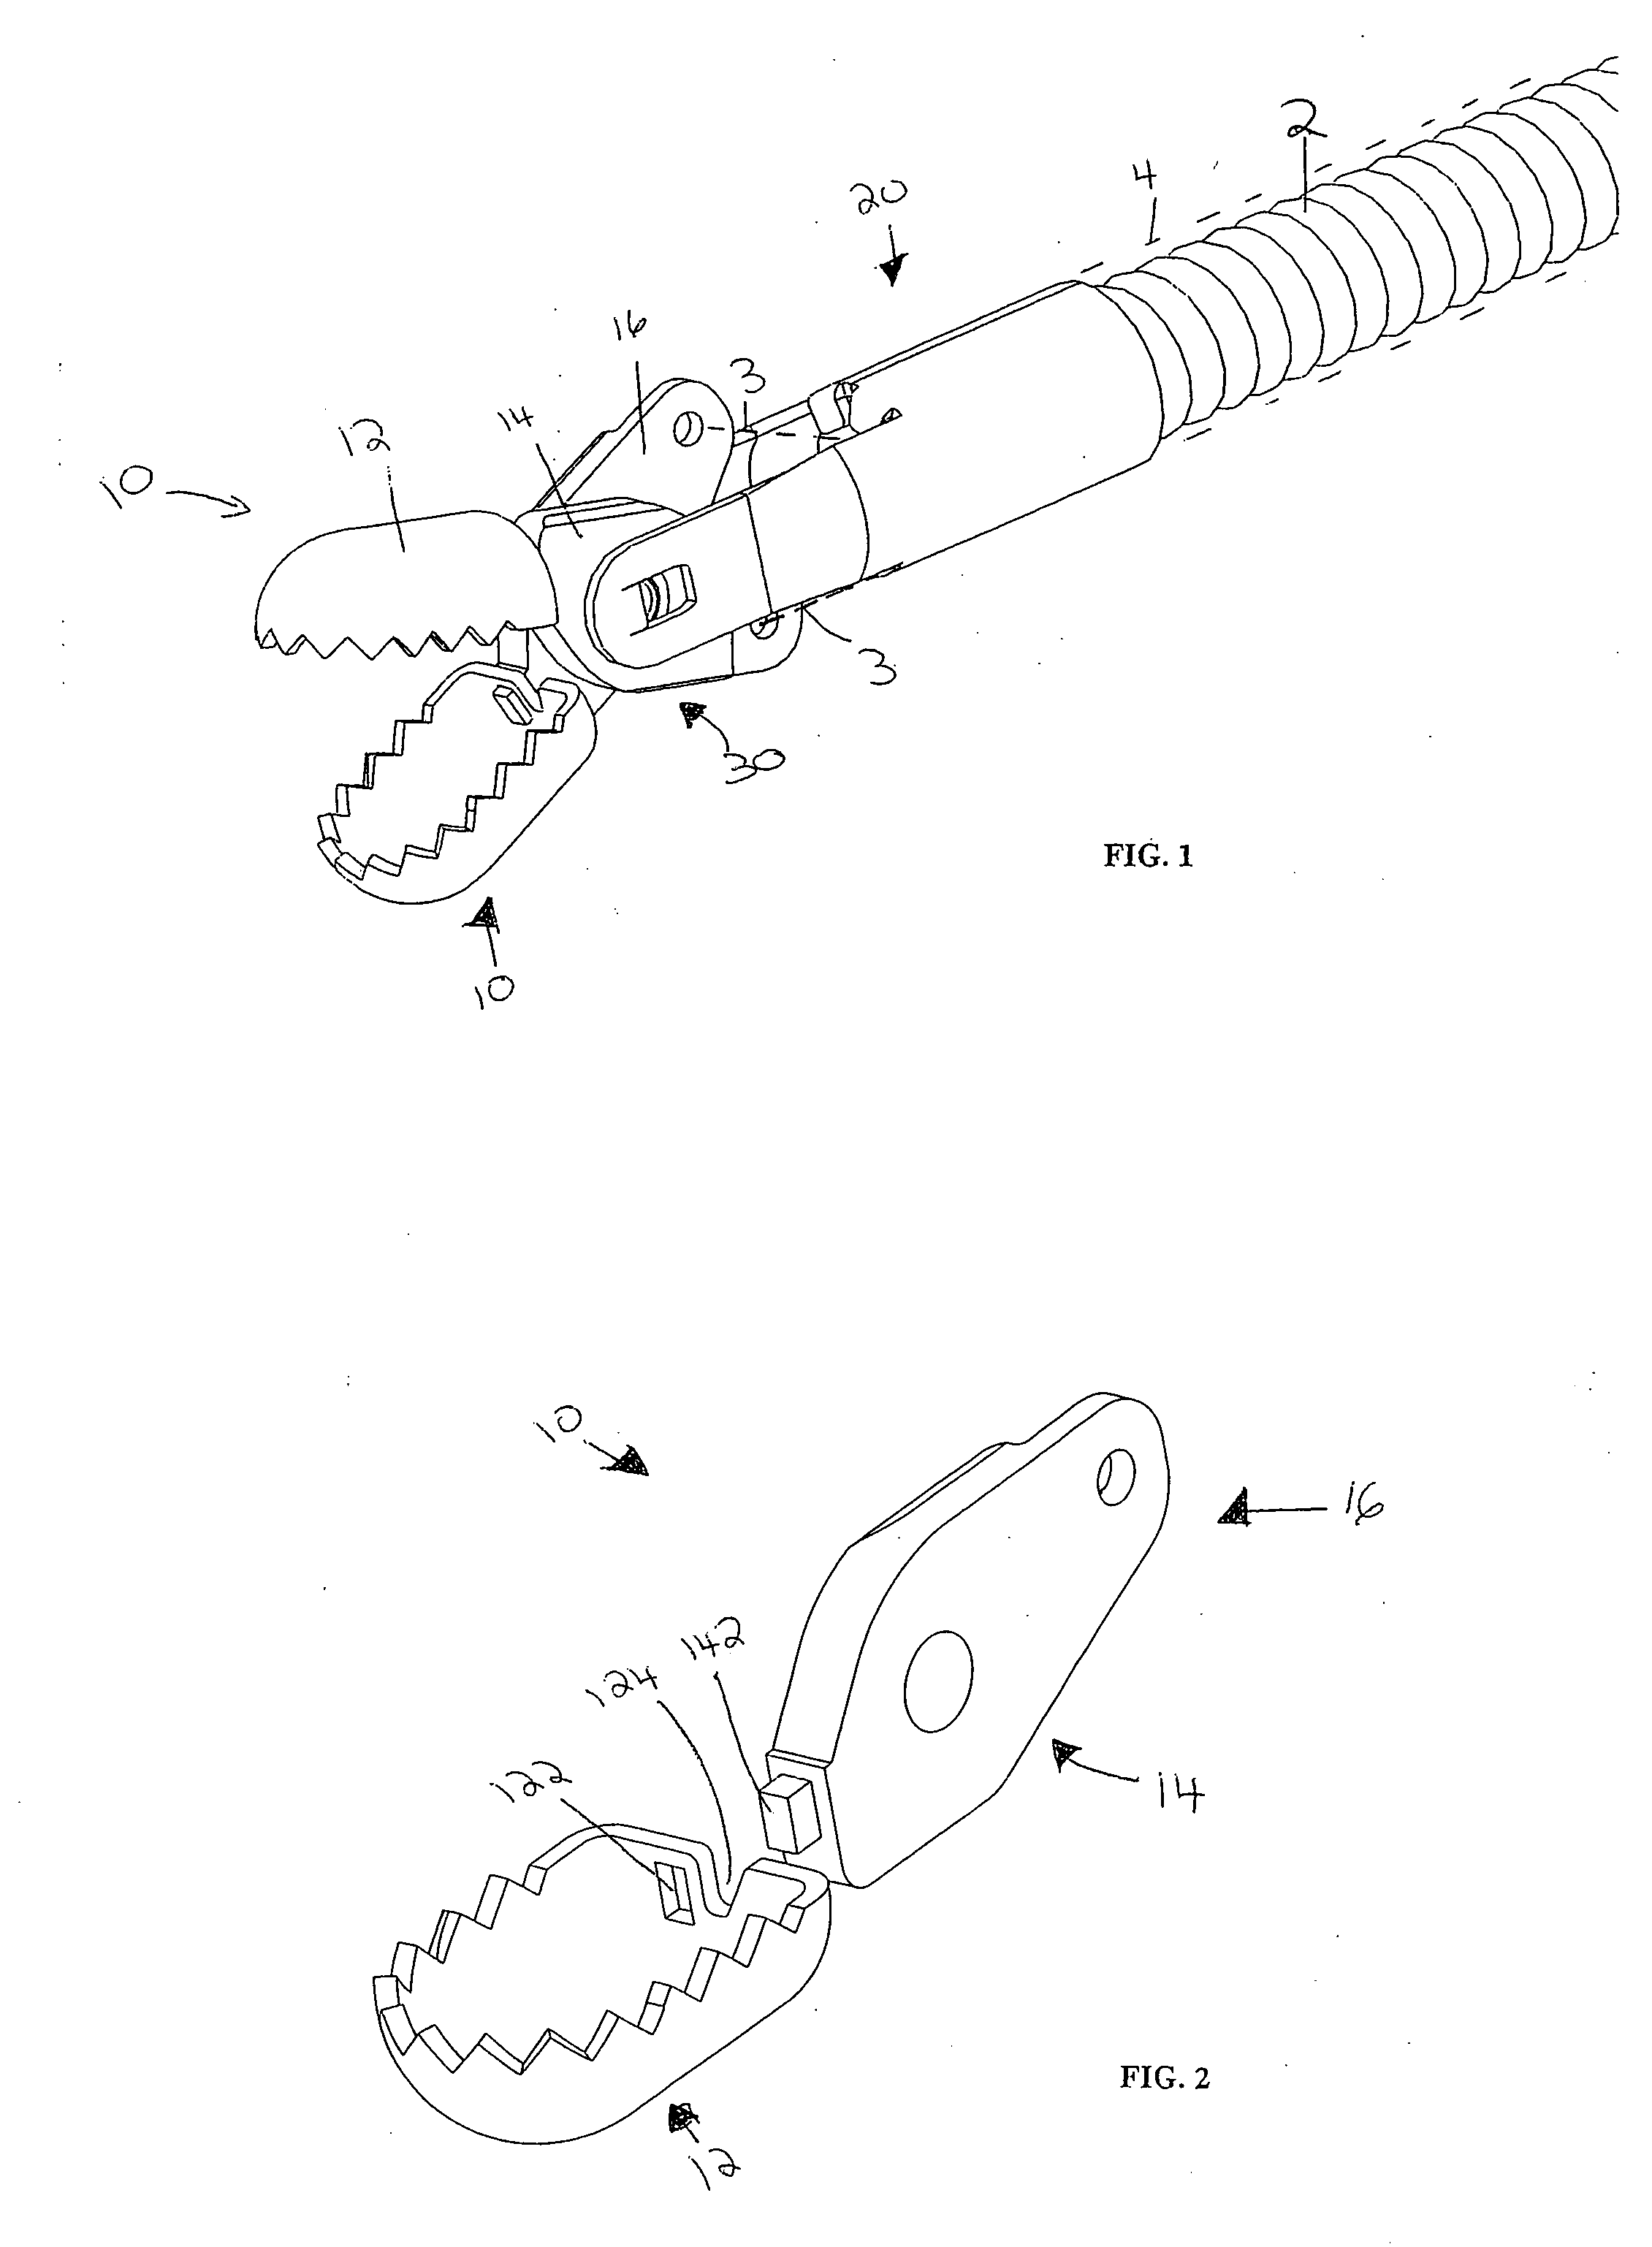 End effector for surgical instrument, surgical instrument, and method for forming the end effector